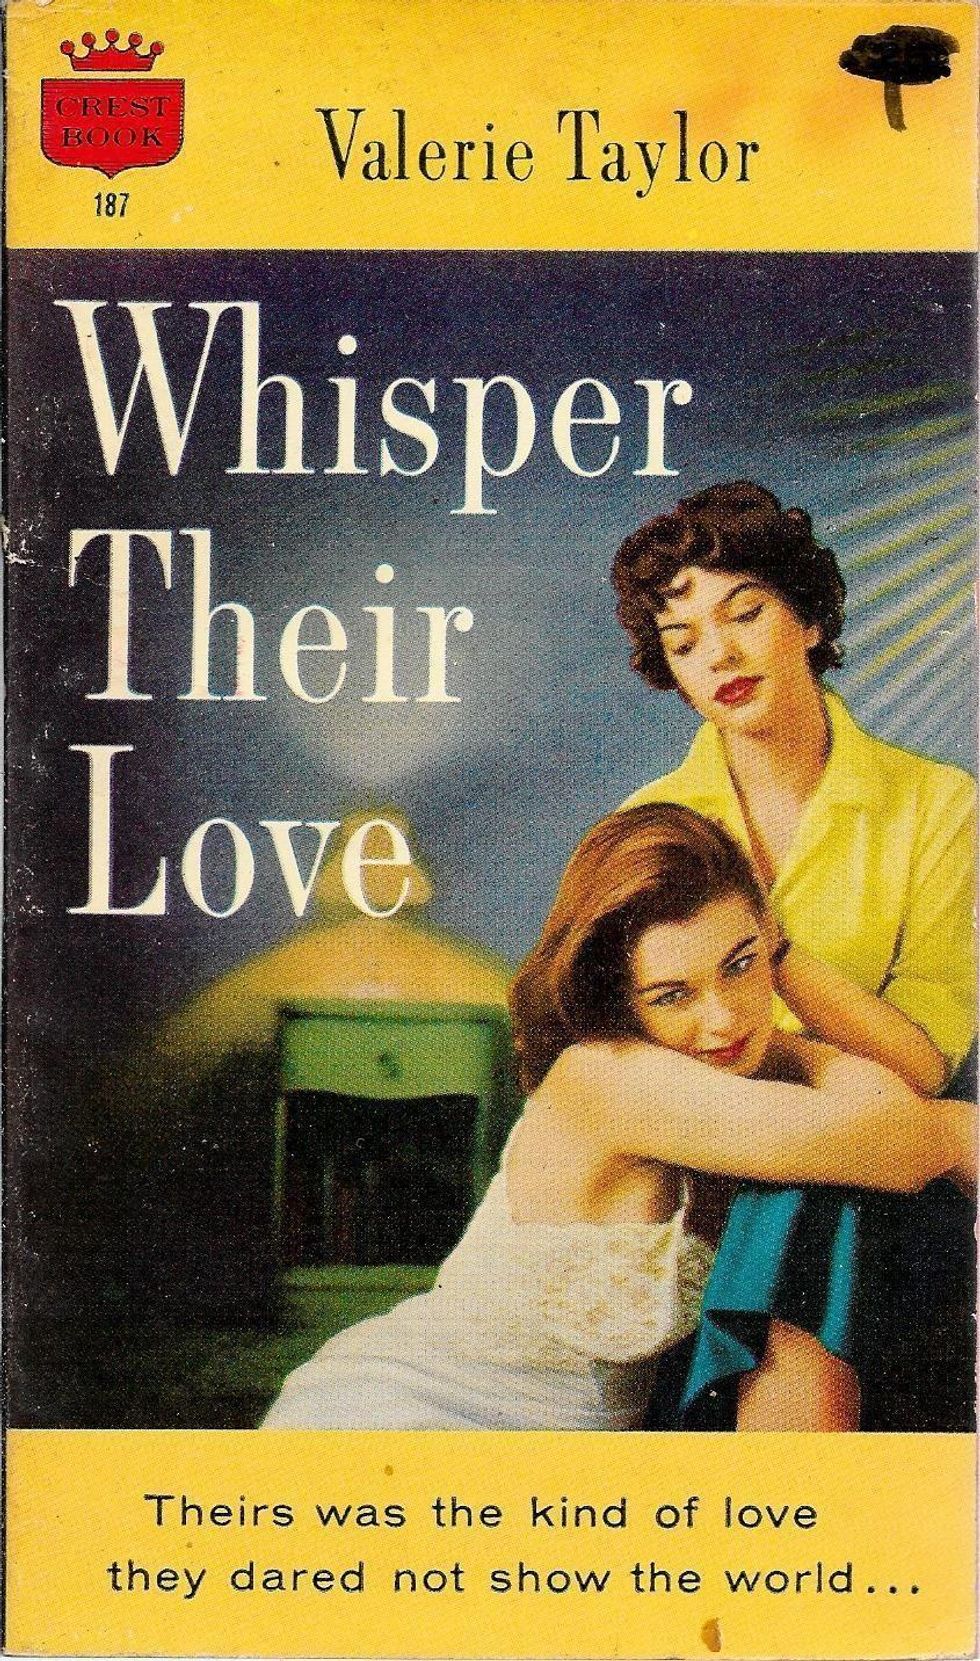 Looking For Lesbians At One Archives Explores Lesbian Pulp Fiction 